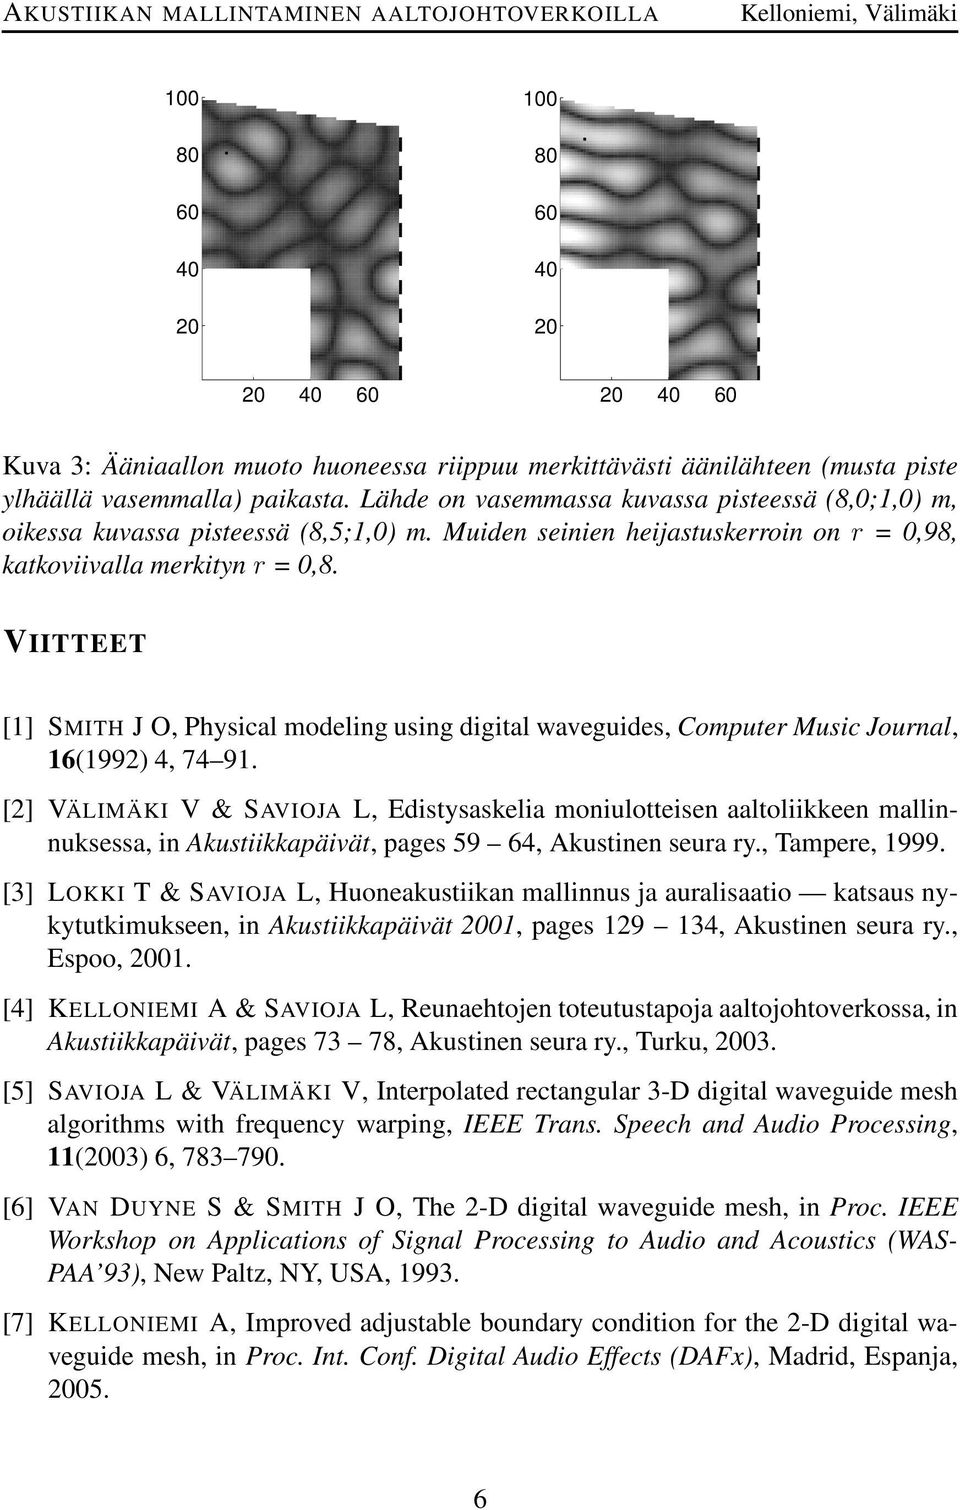 VIITTEET [1] SMITH J O, Physical modeling using digital waveguides, Computer Music Journal, 16(1992) 4, 74 91.